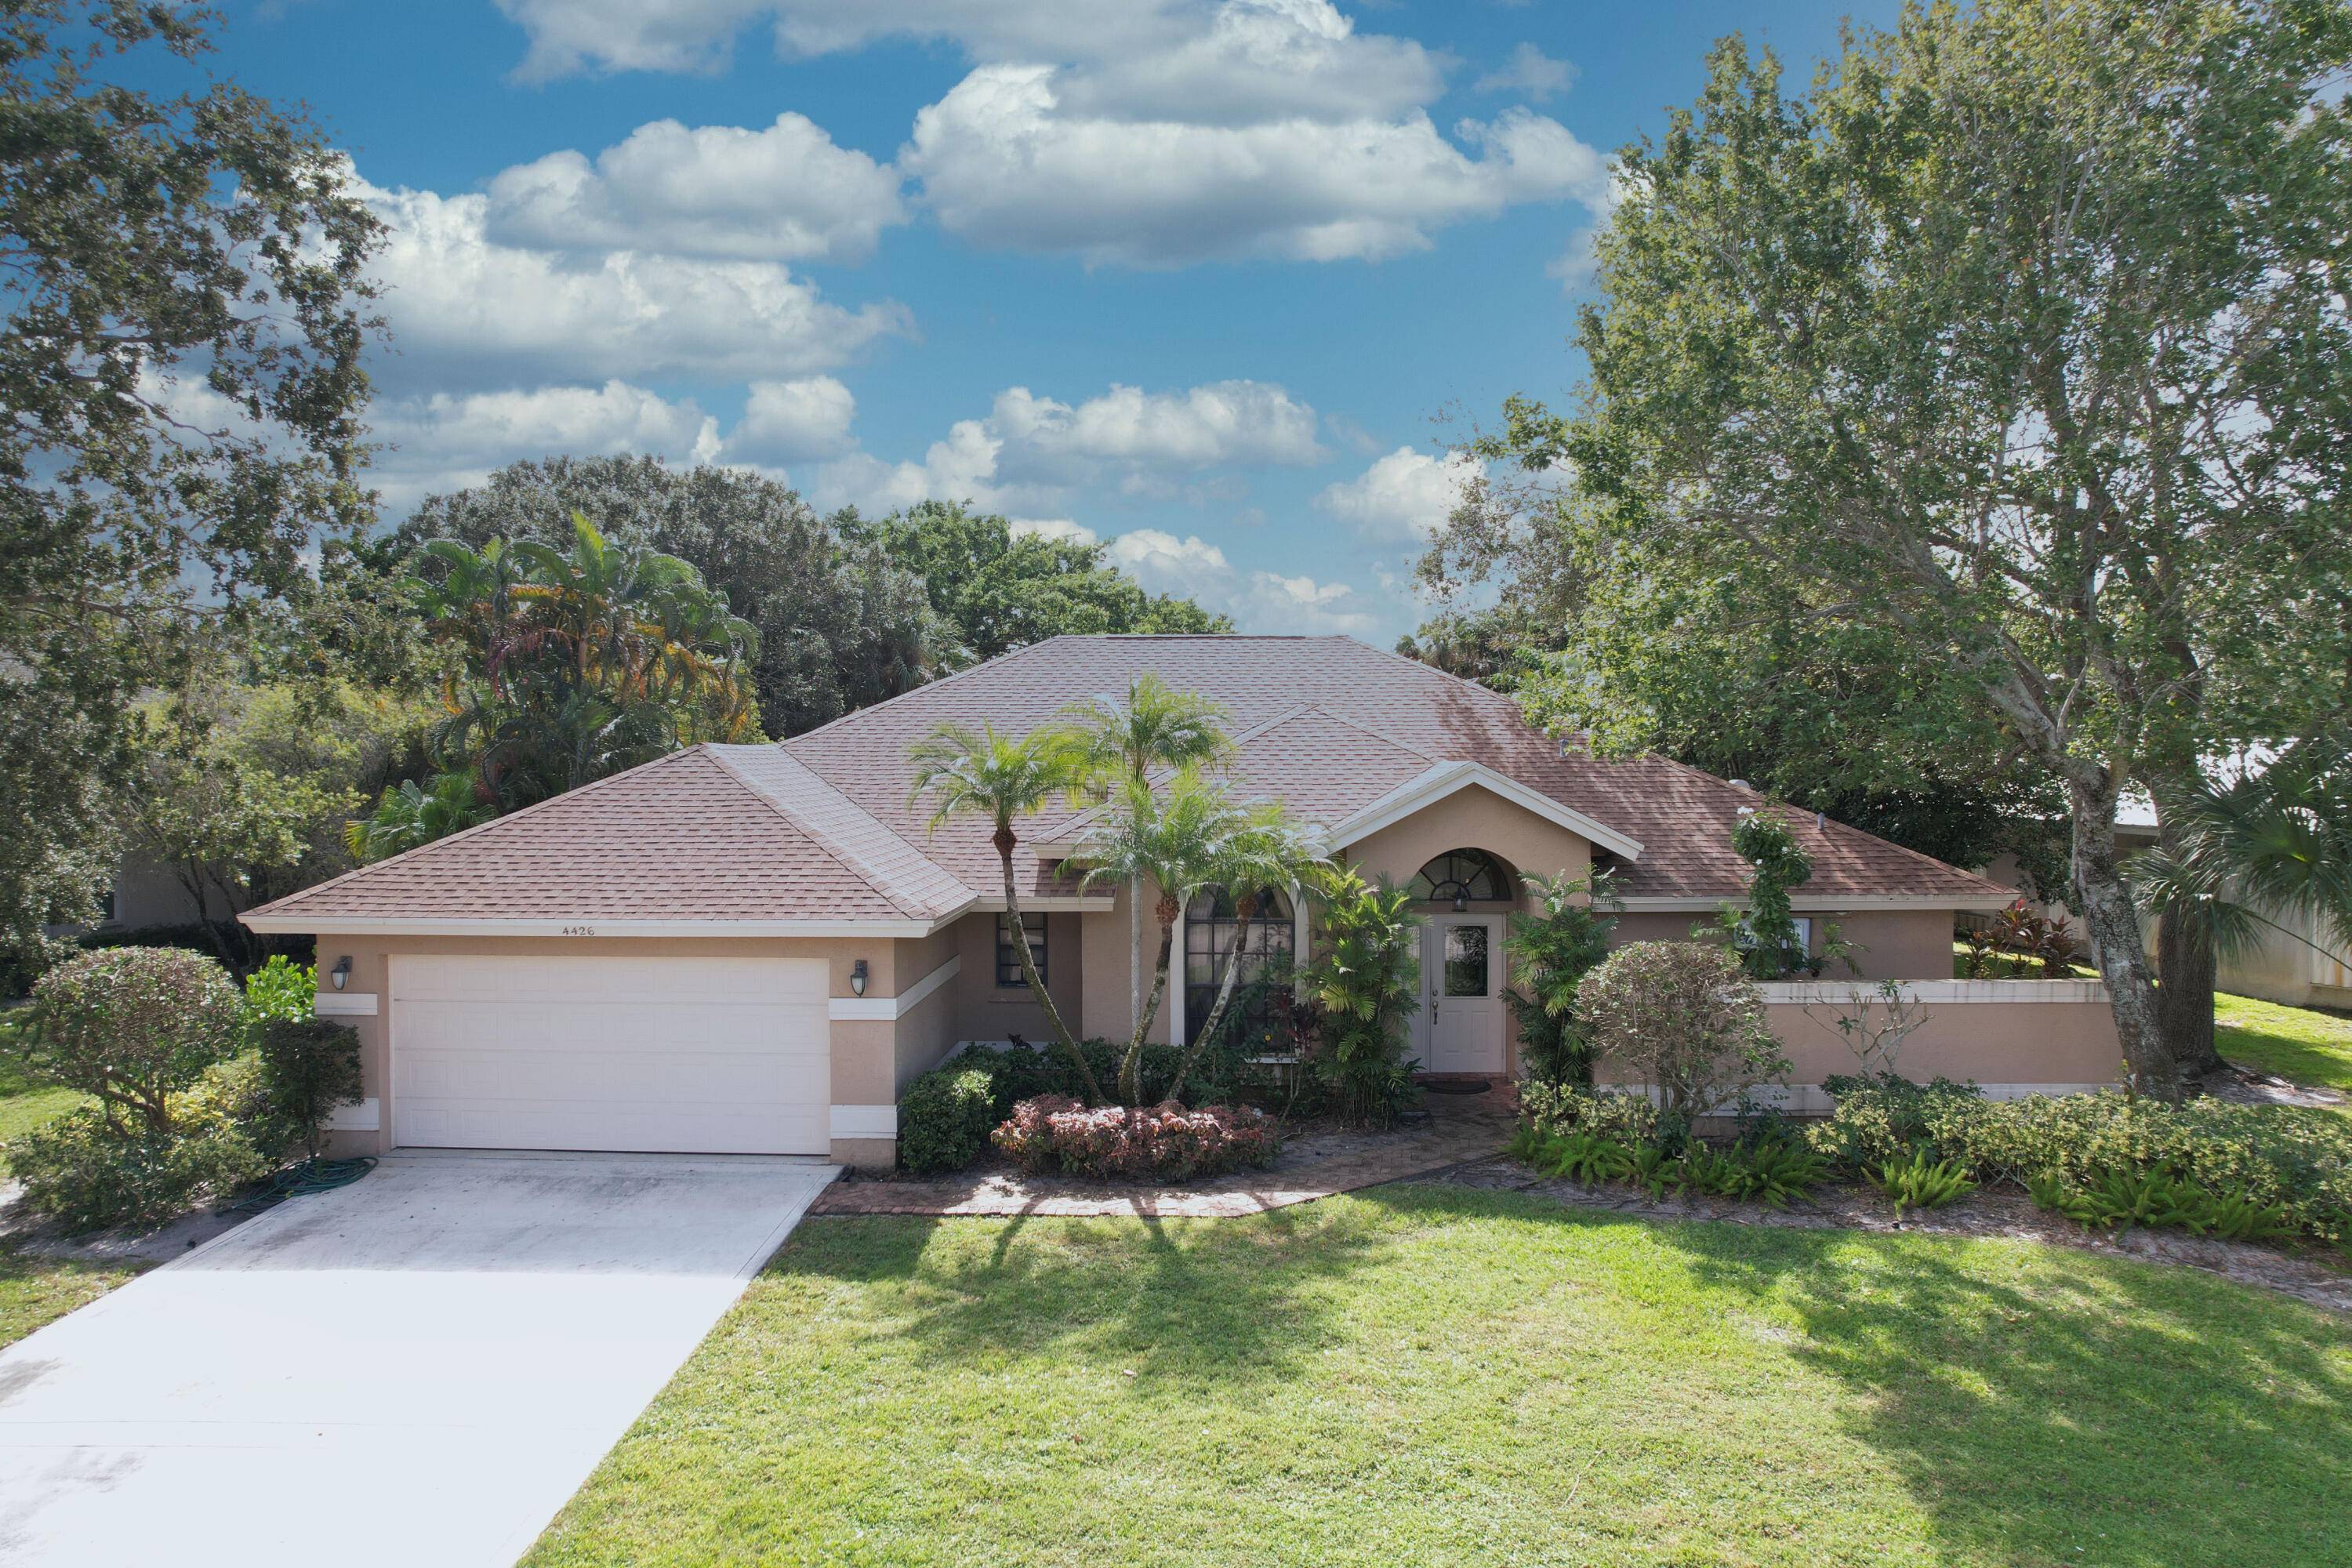 Wonderful home at a great price in very desirable Palm City gated community.